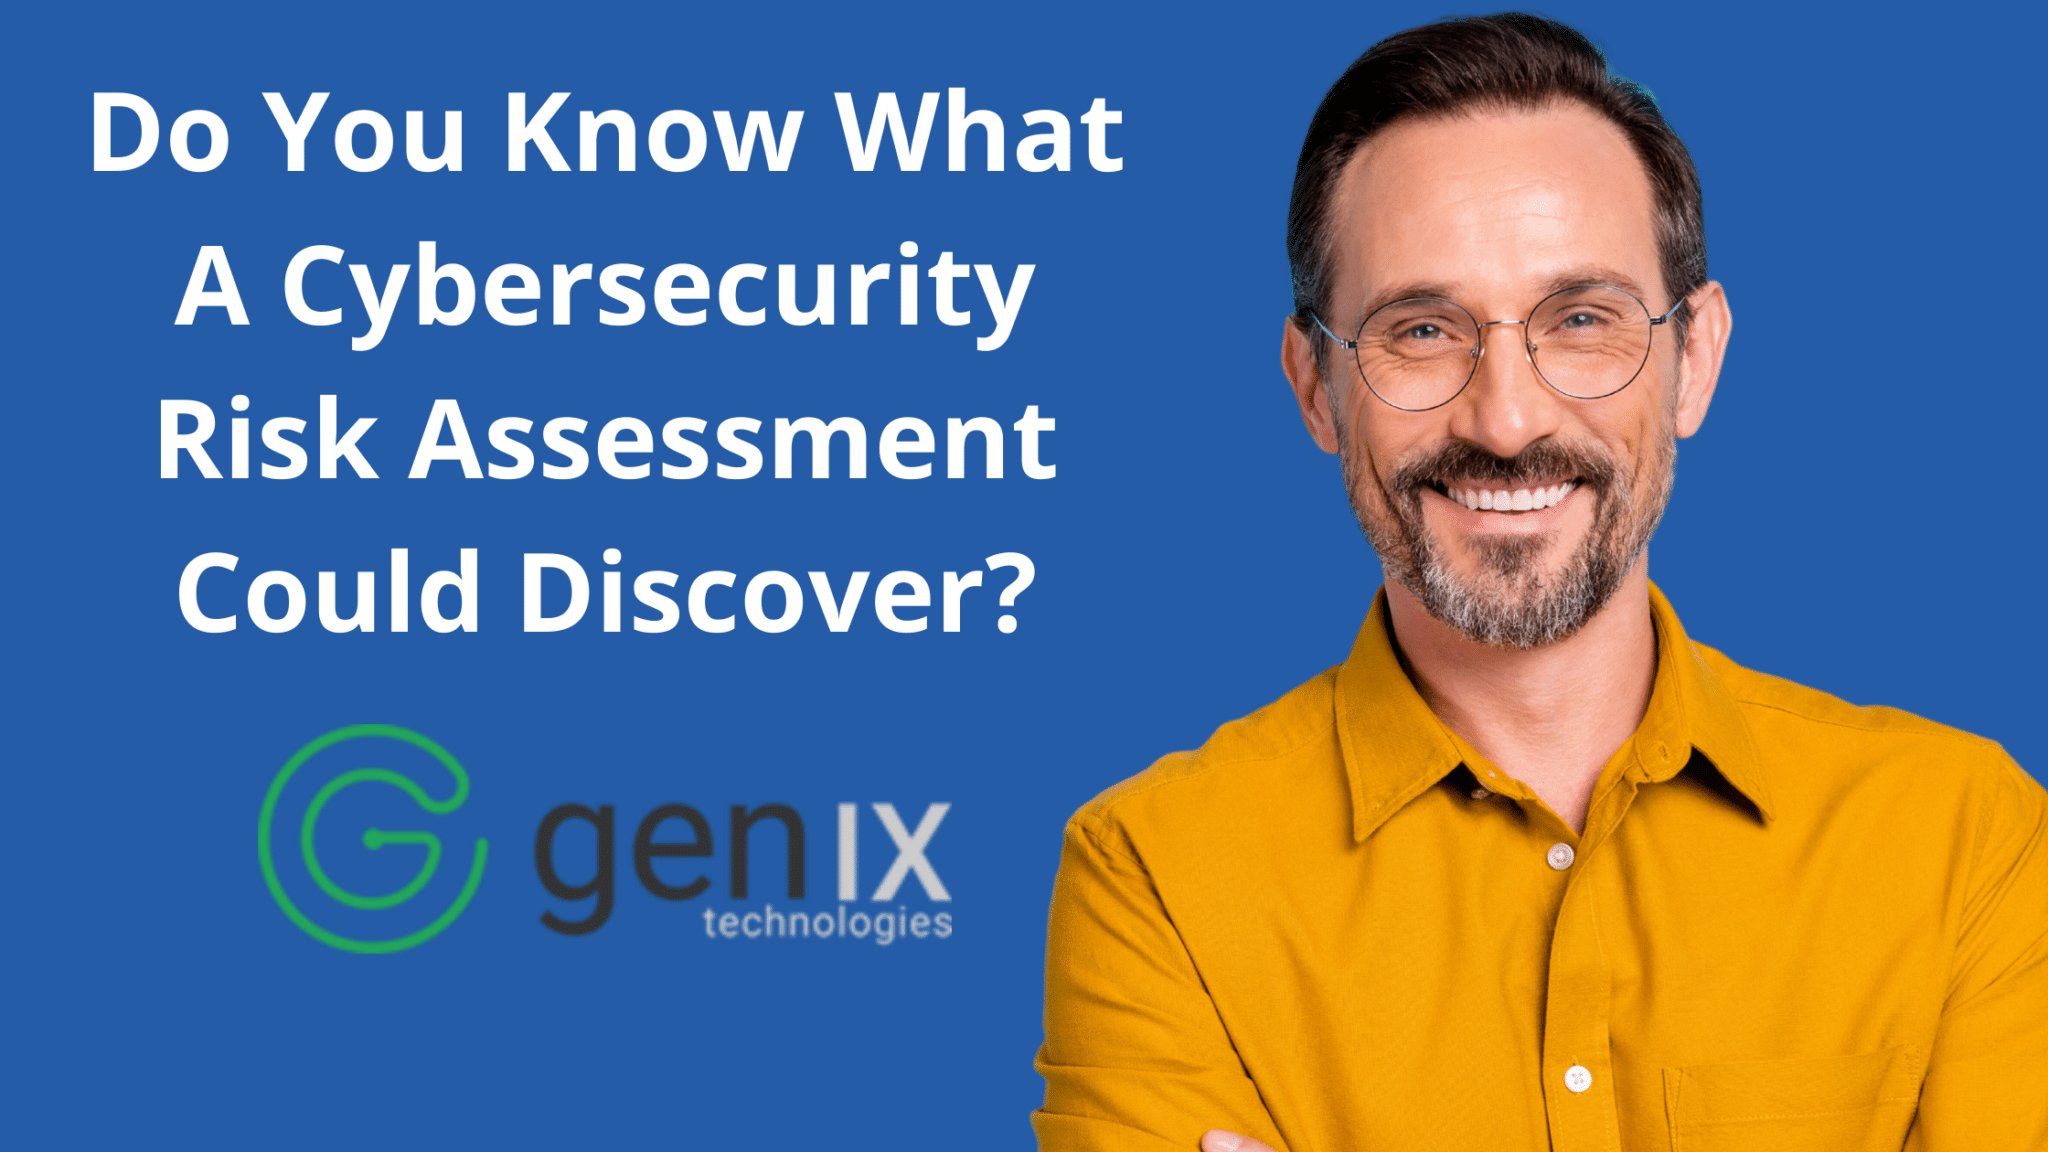 Do You Know What A Cybersecurity Risk Assessment Could Discover?